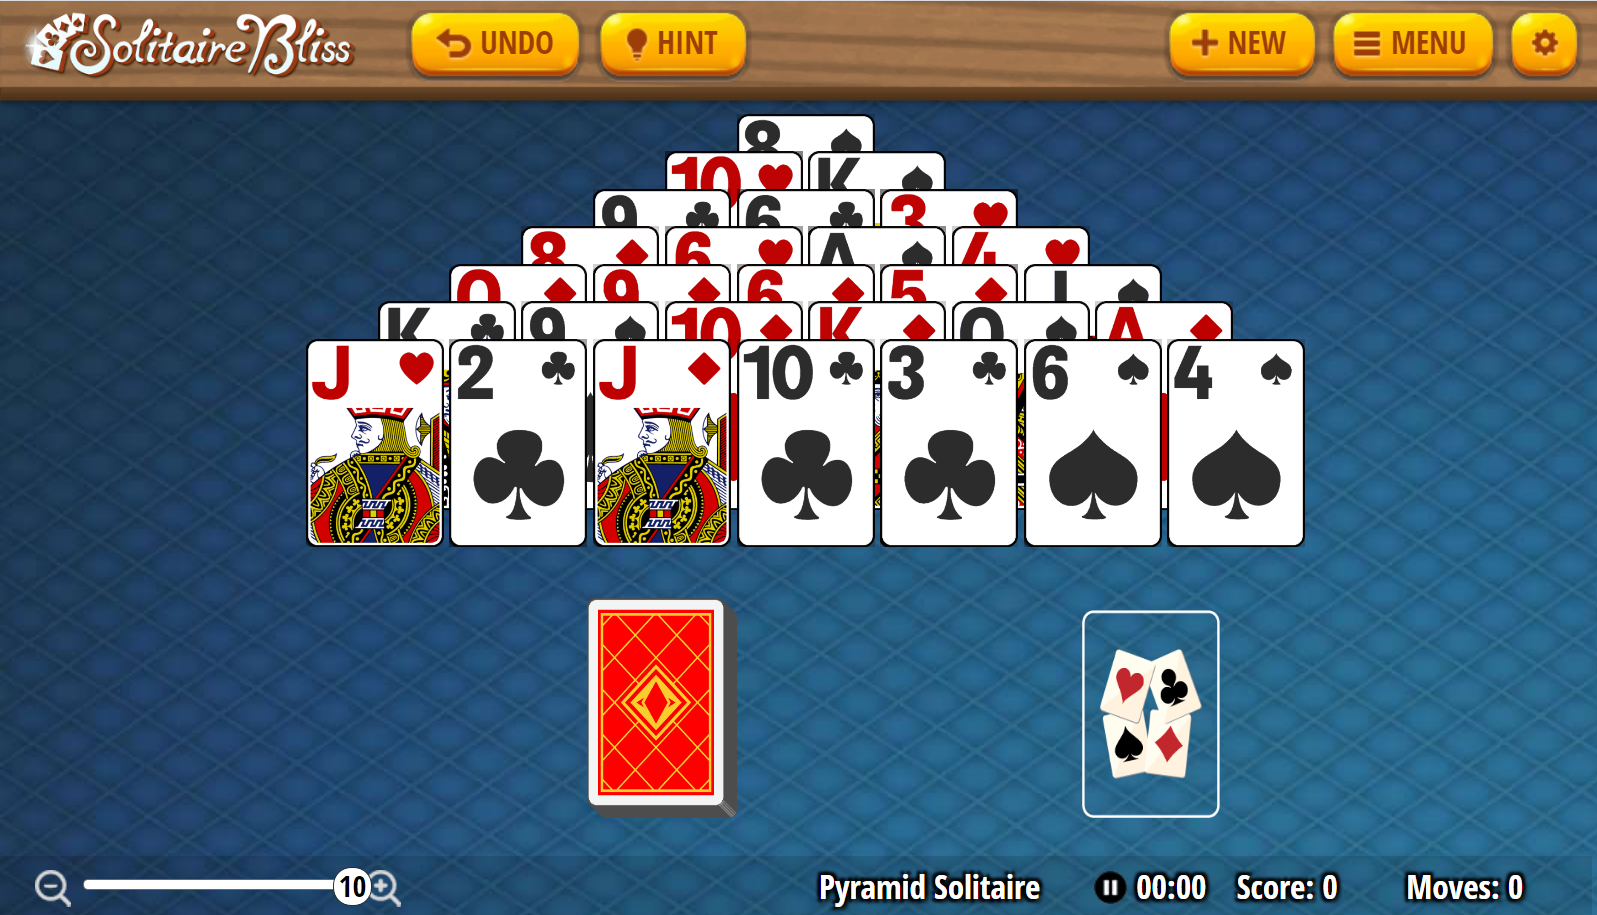 Spider Solitaire 1 Suit, Solitaire Bliss Wiki